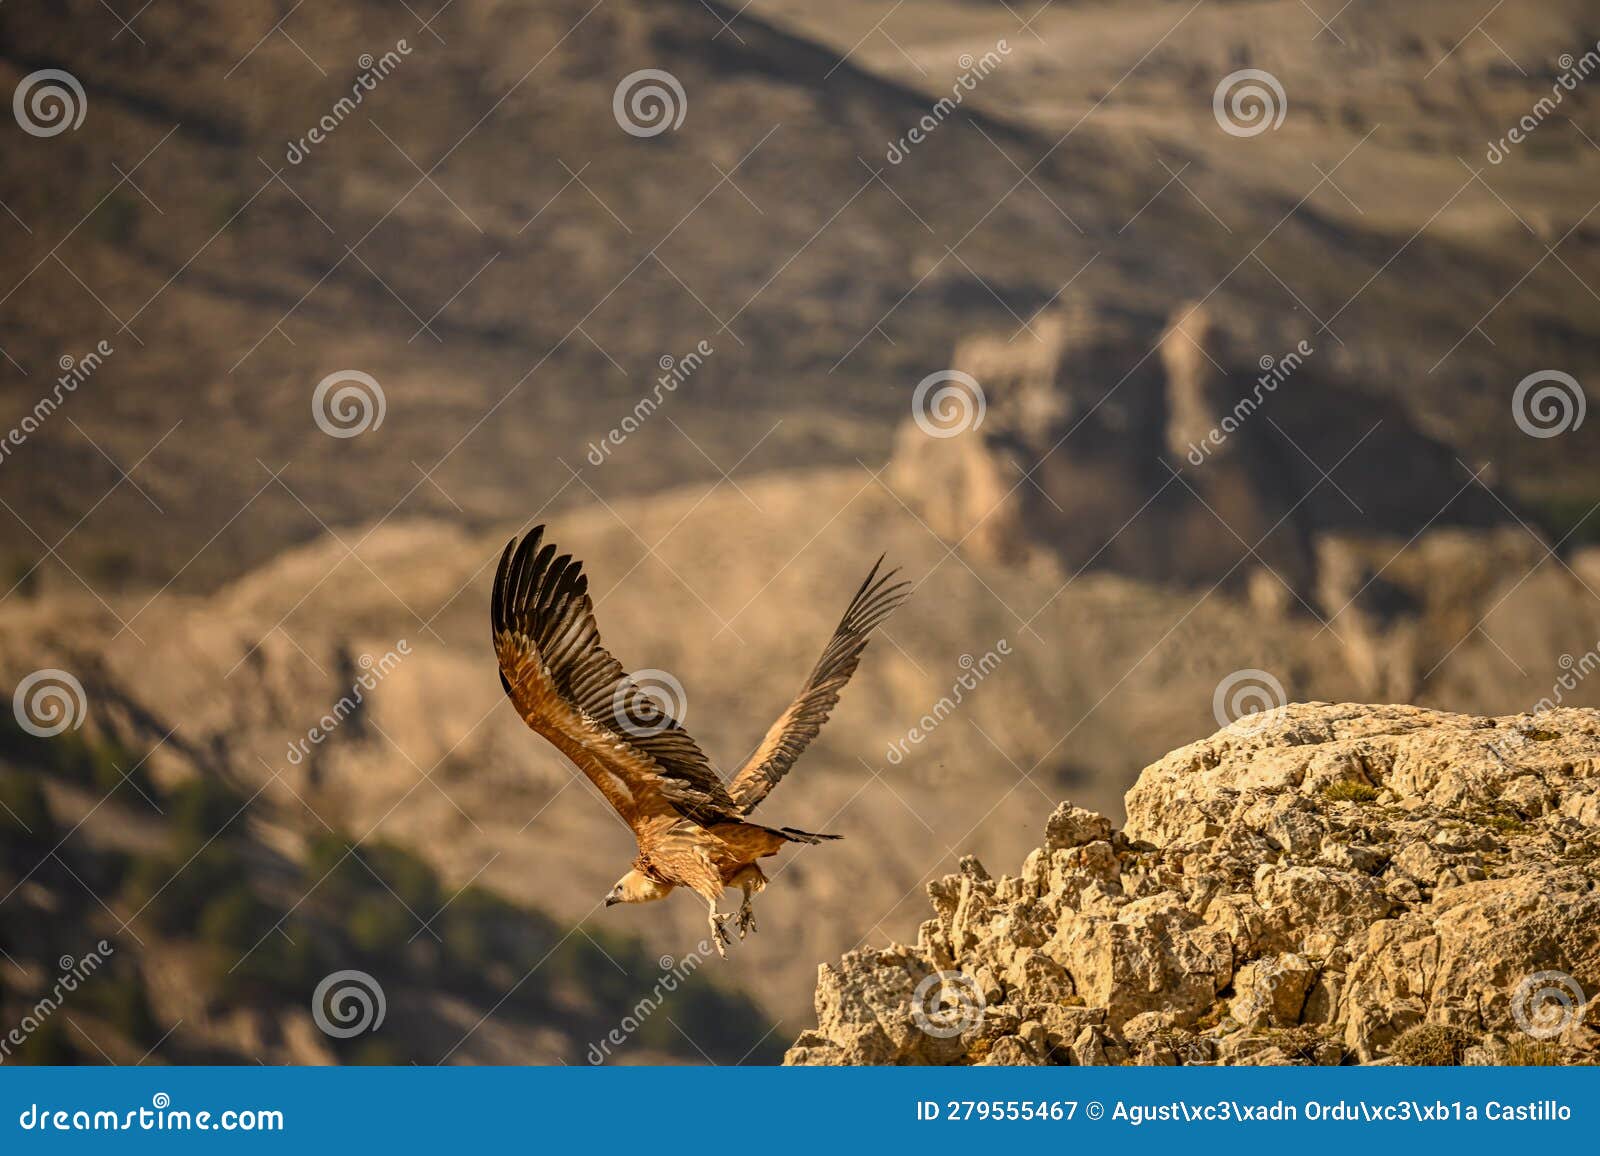 Griffon Vulture or Gyps Fulvus in Flight. Stock Image - Image of ...